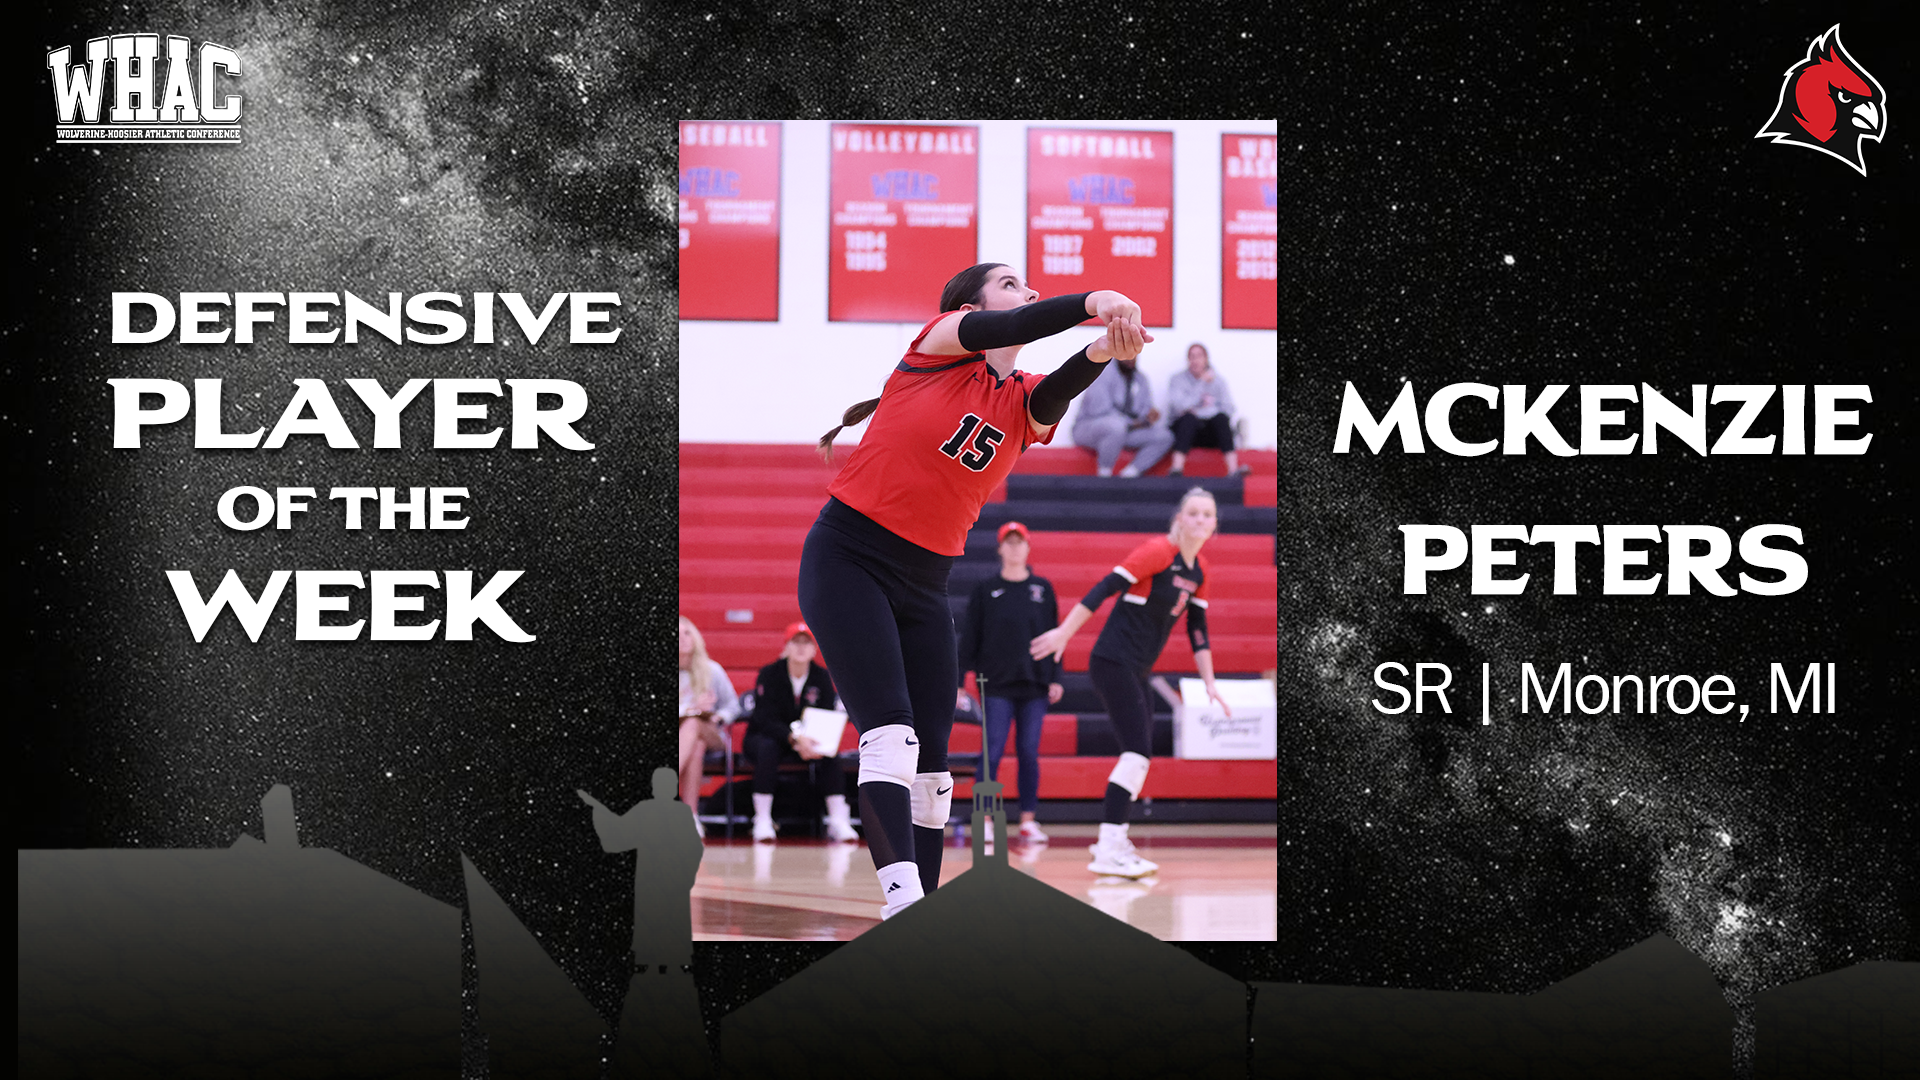 McKenzie Peter's earns second WHAC Player of the Week honors